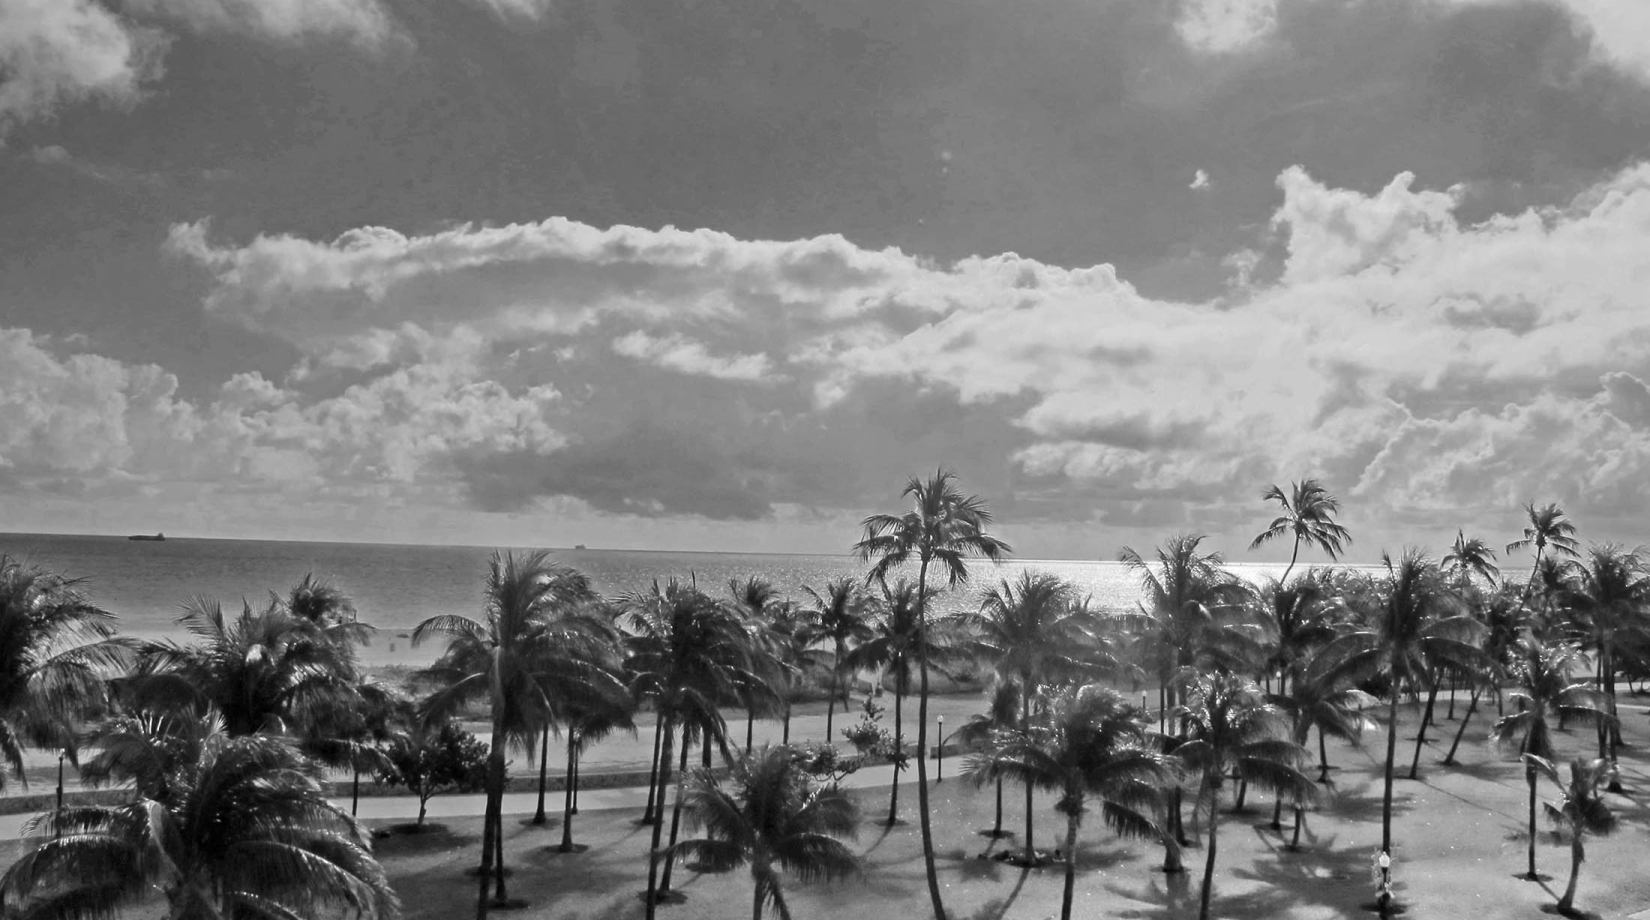 Miami's South Beach in black and white, with clouds and palm trees.